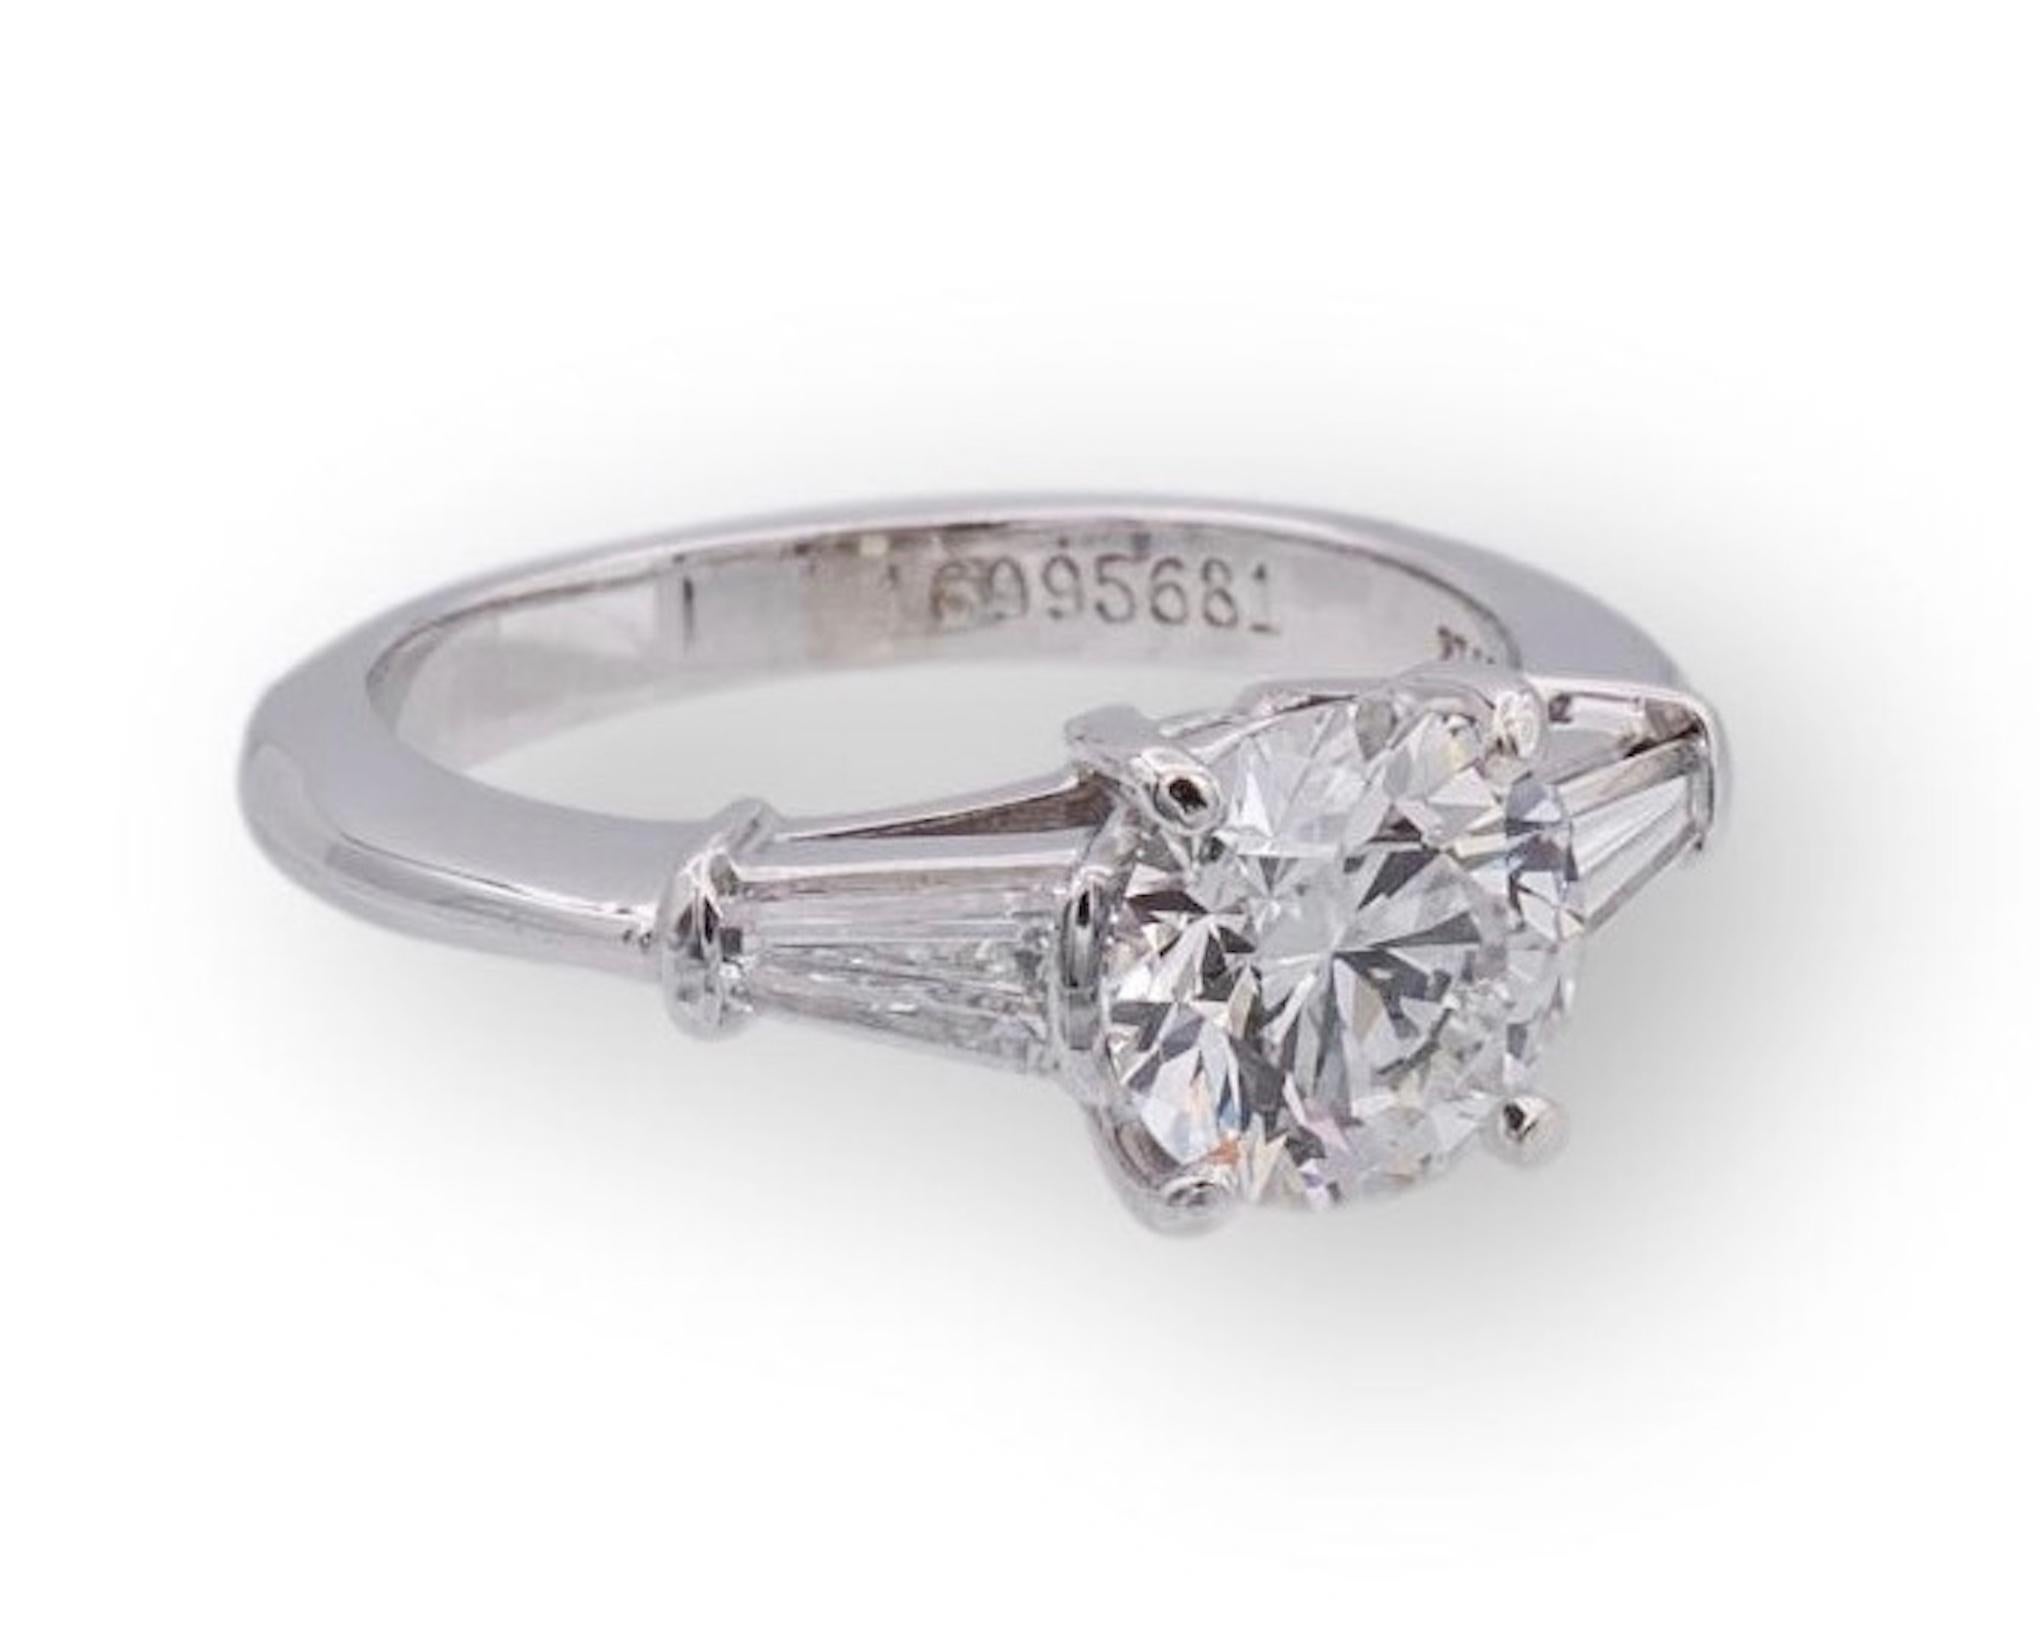 tiffany three stone engagement ring with baguette side stones in platinum